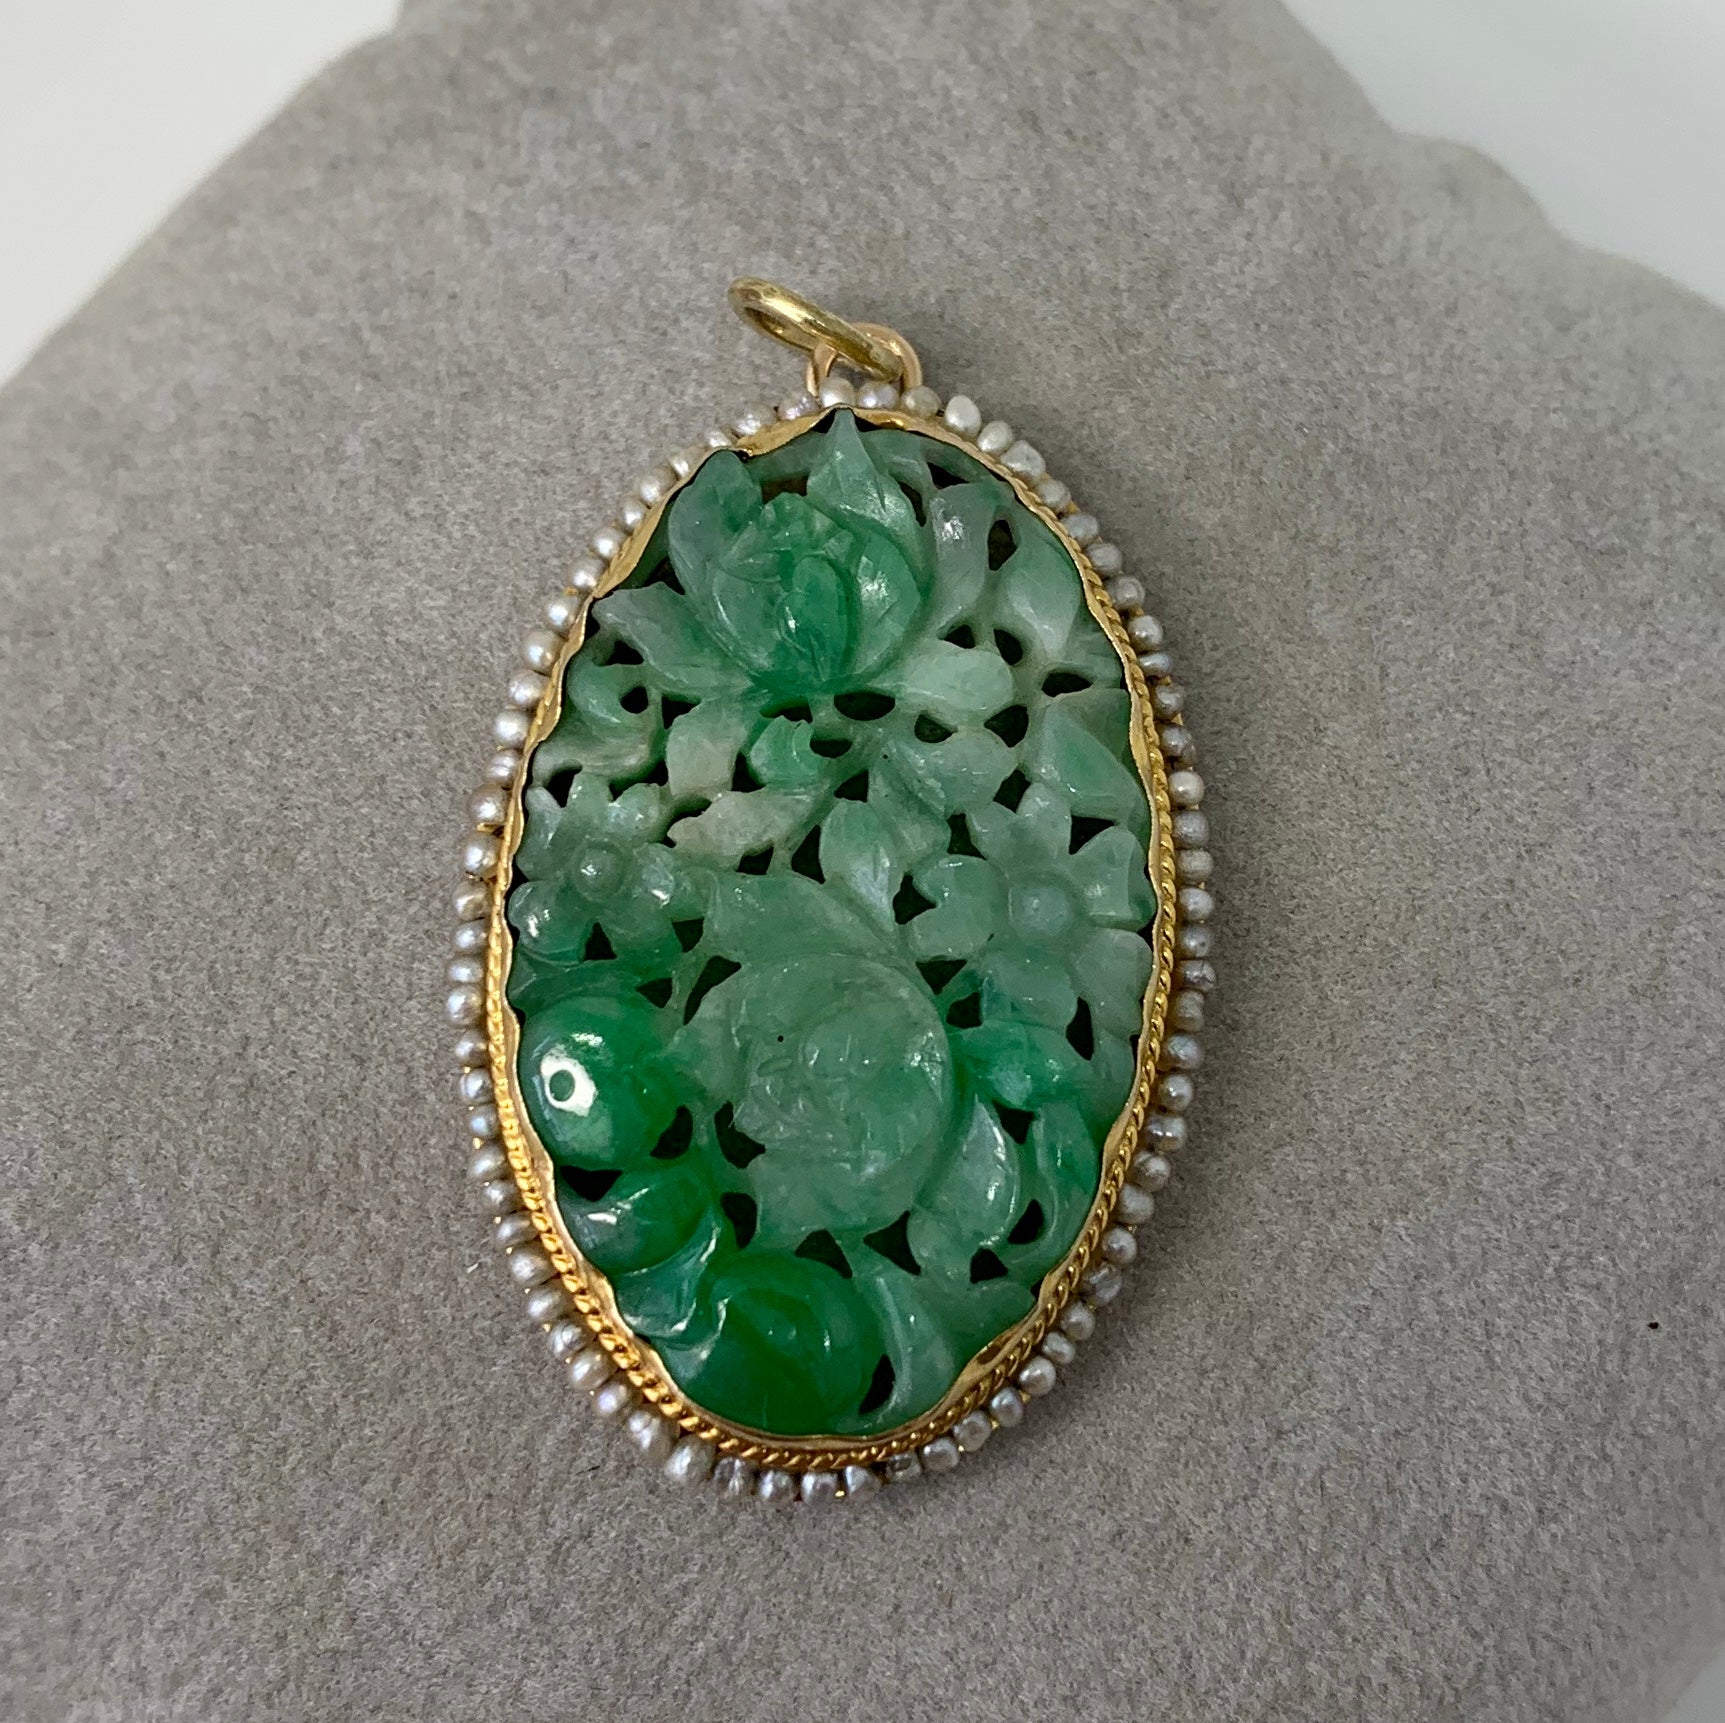 THIS IS A VERY BEAUTIFUL ORIGINAL ART NOUVEAU - ART DECO PENDANT WITH A STUNNING CARVED JADE MEDALLION OF GREAT BEAUTY SURROUNDED BY A DECORATED 14 KARAT GOLD BORDER WITH A HALO OF SEED PEARLS.   THE OVAL JADE IS CARVED WITH A FLOWER MOTIF WHICH I